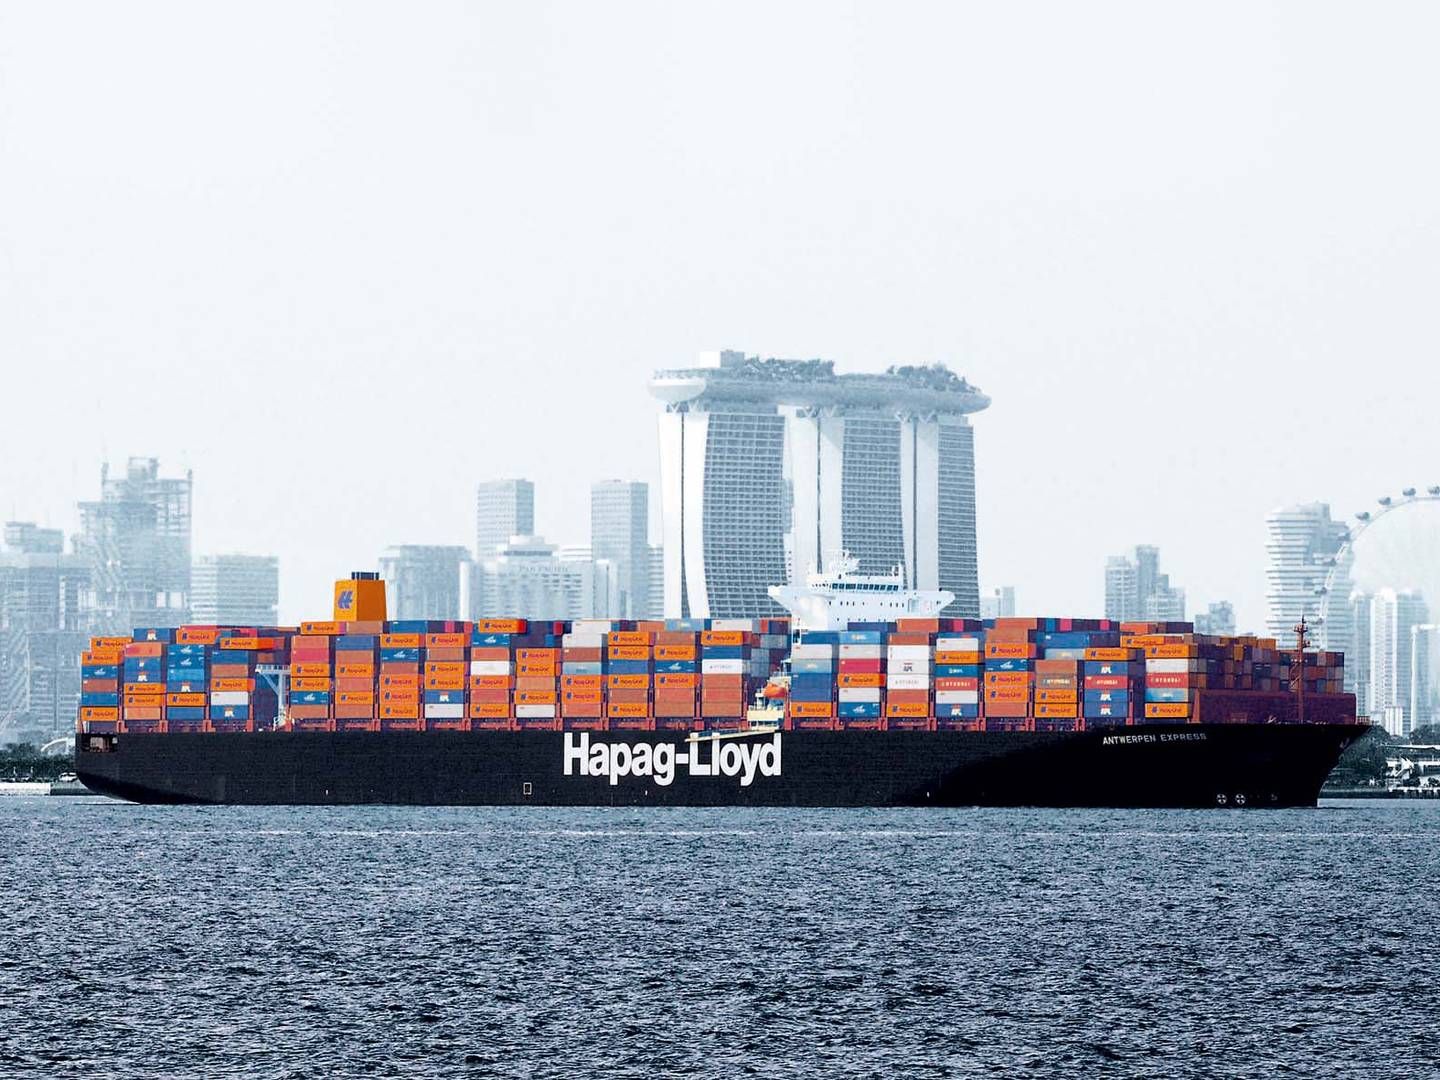 German Hapag-Lloyd is now a candidate to buy competitor and alliance partner HMM. | Photo: Pr / Hapag-lloyd